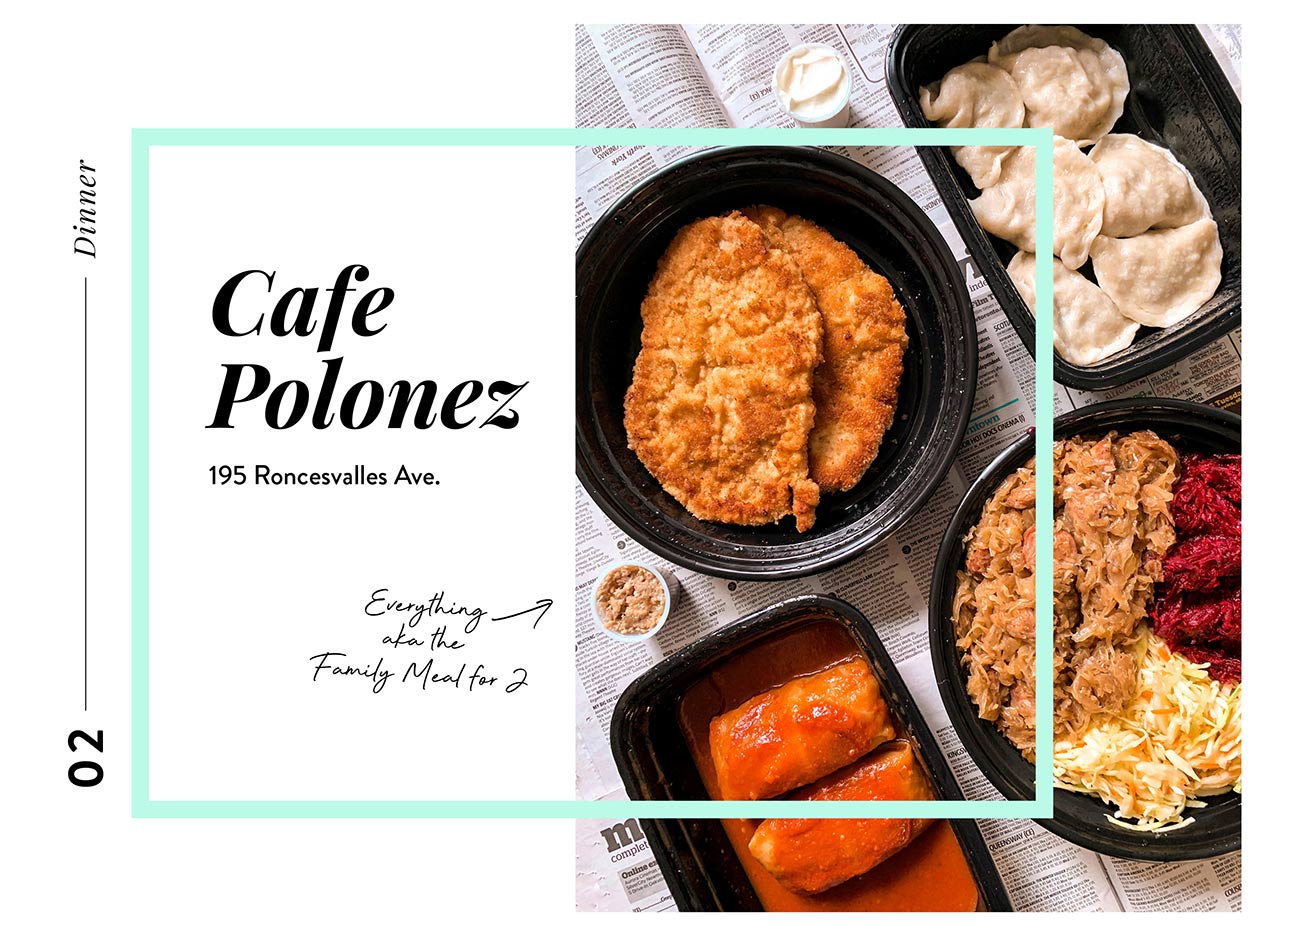 Places to eat in Toronto - Toronto restaurants - Cafe Polonez